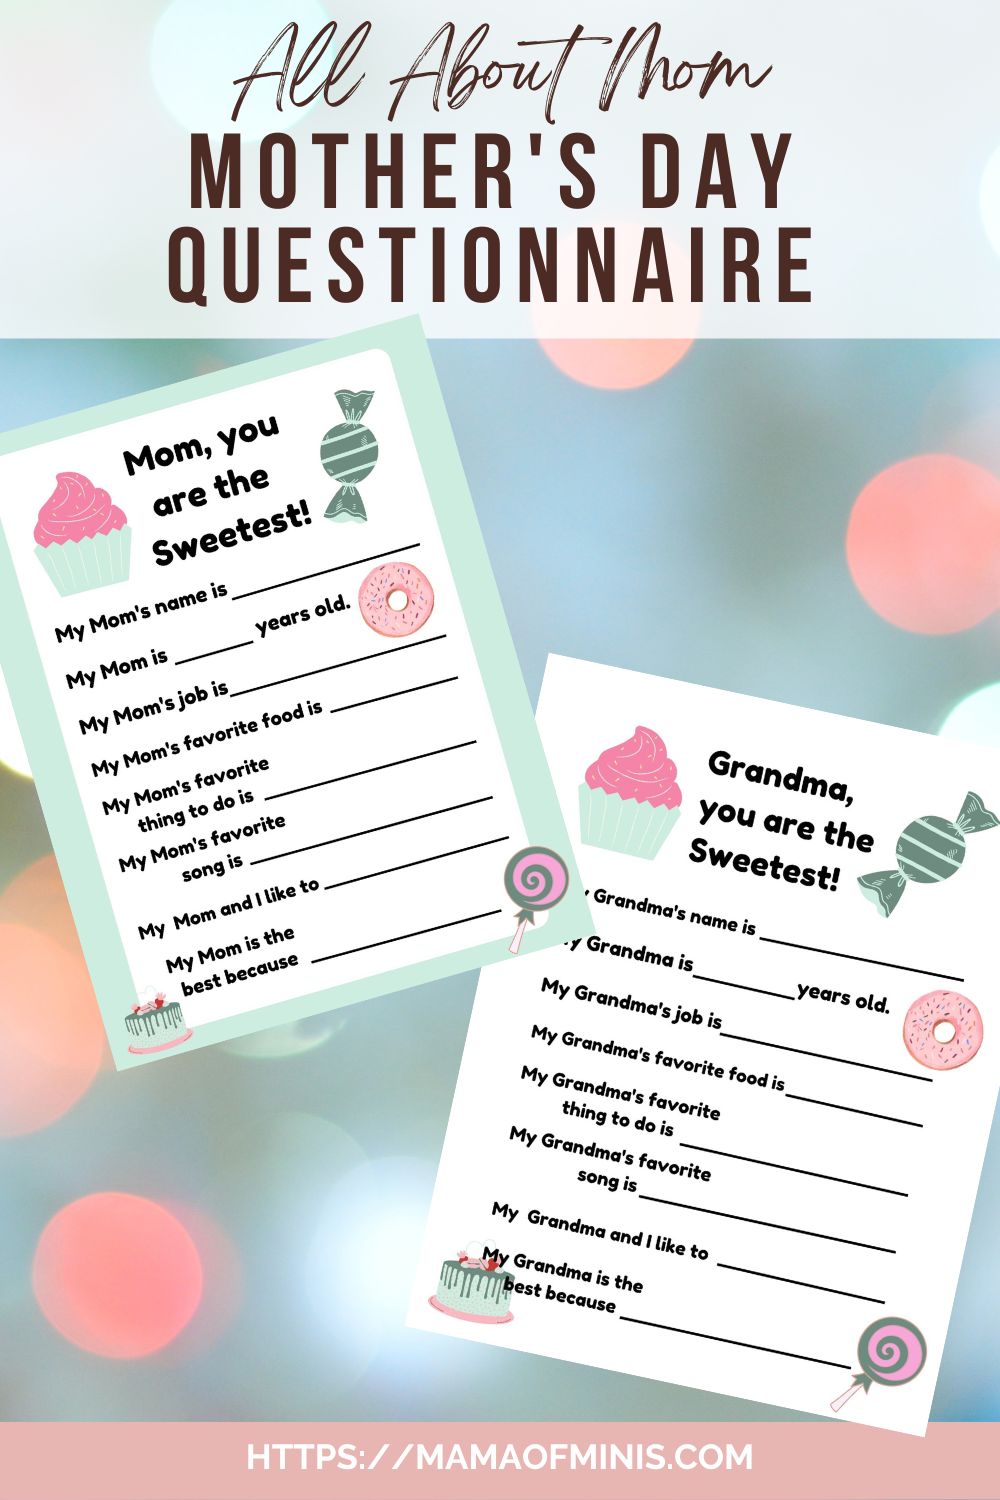 All About Mom Mother's Day Questionnaire Pin